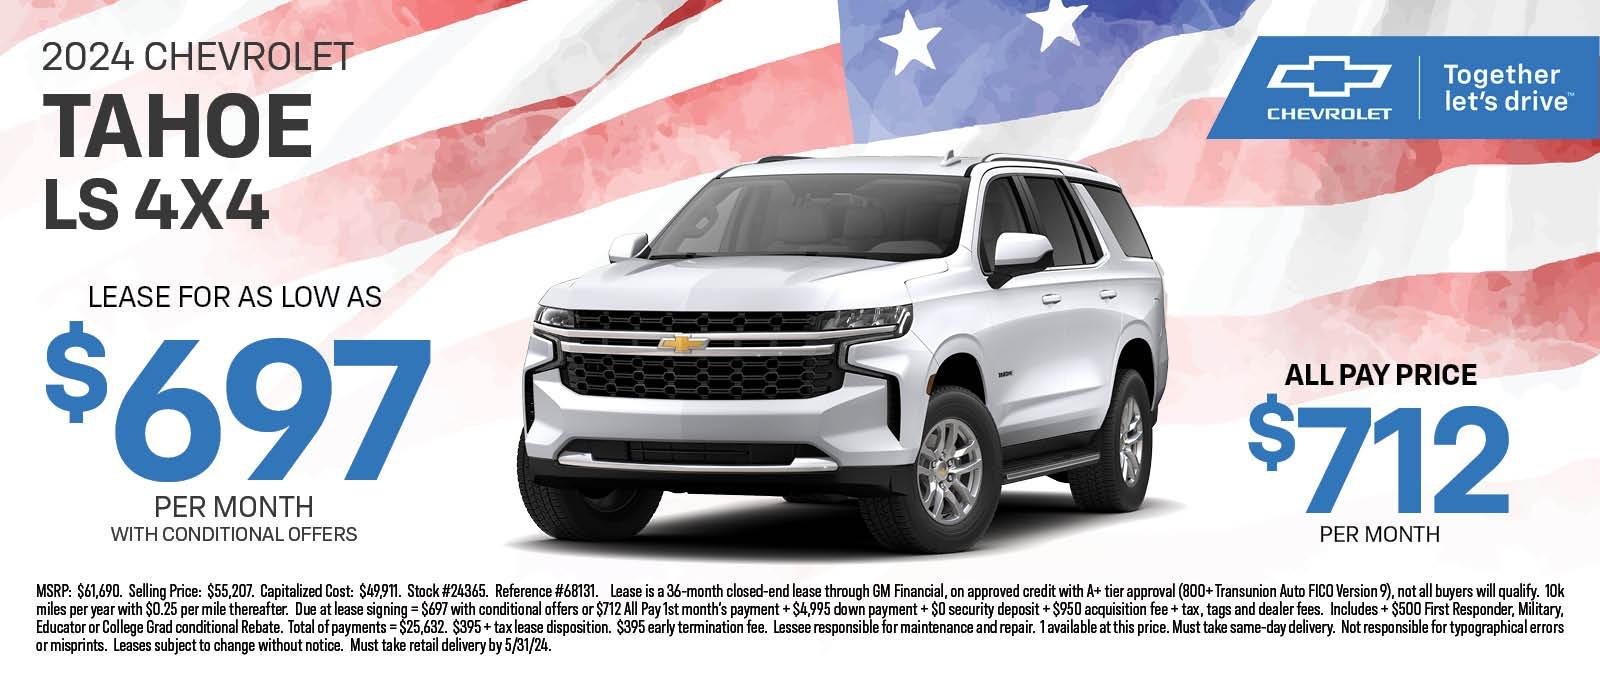 2024 CHEVROLET TAHOE LS 4X4 LEASE FOR AS LOW AS $697 PER MONTH WITH CONDITIONAL OFFERS  ALL PAY PRICE $712 PER MONTH